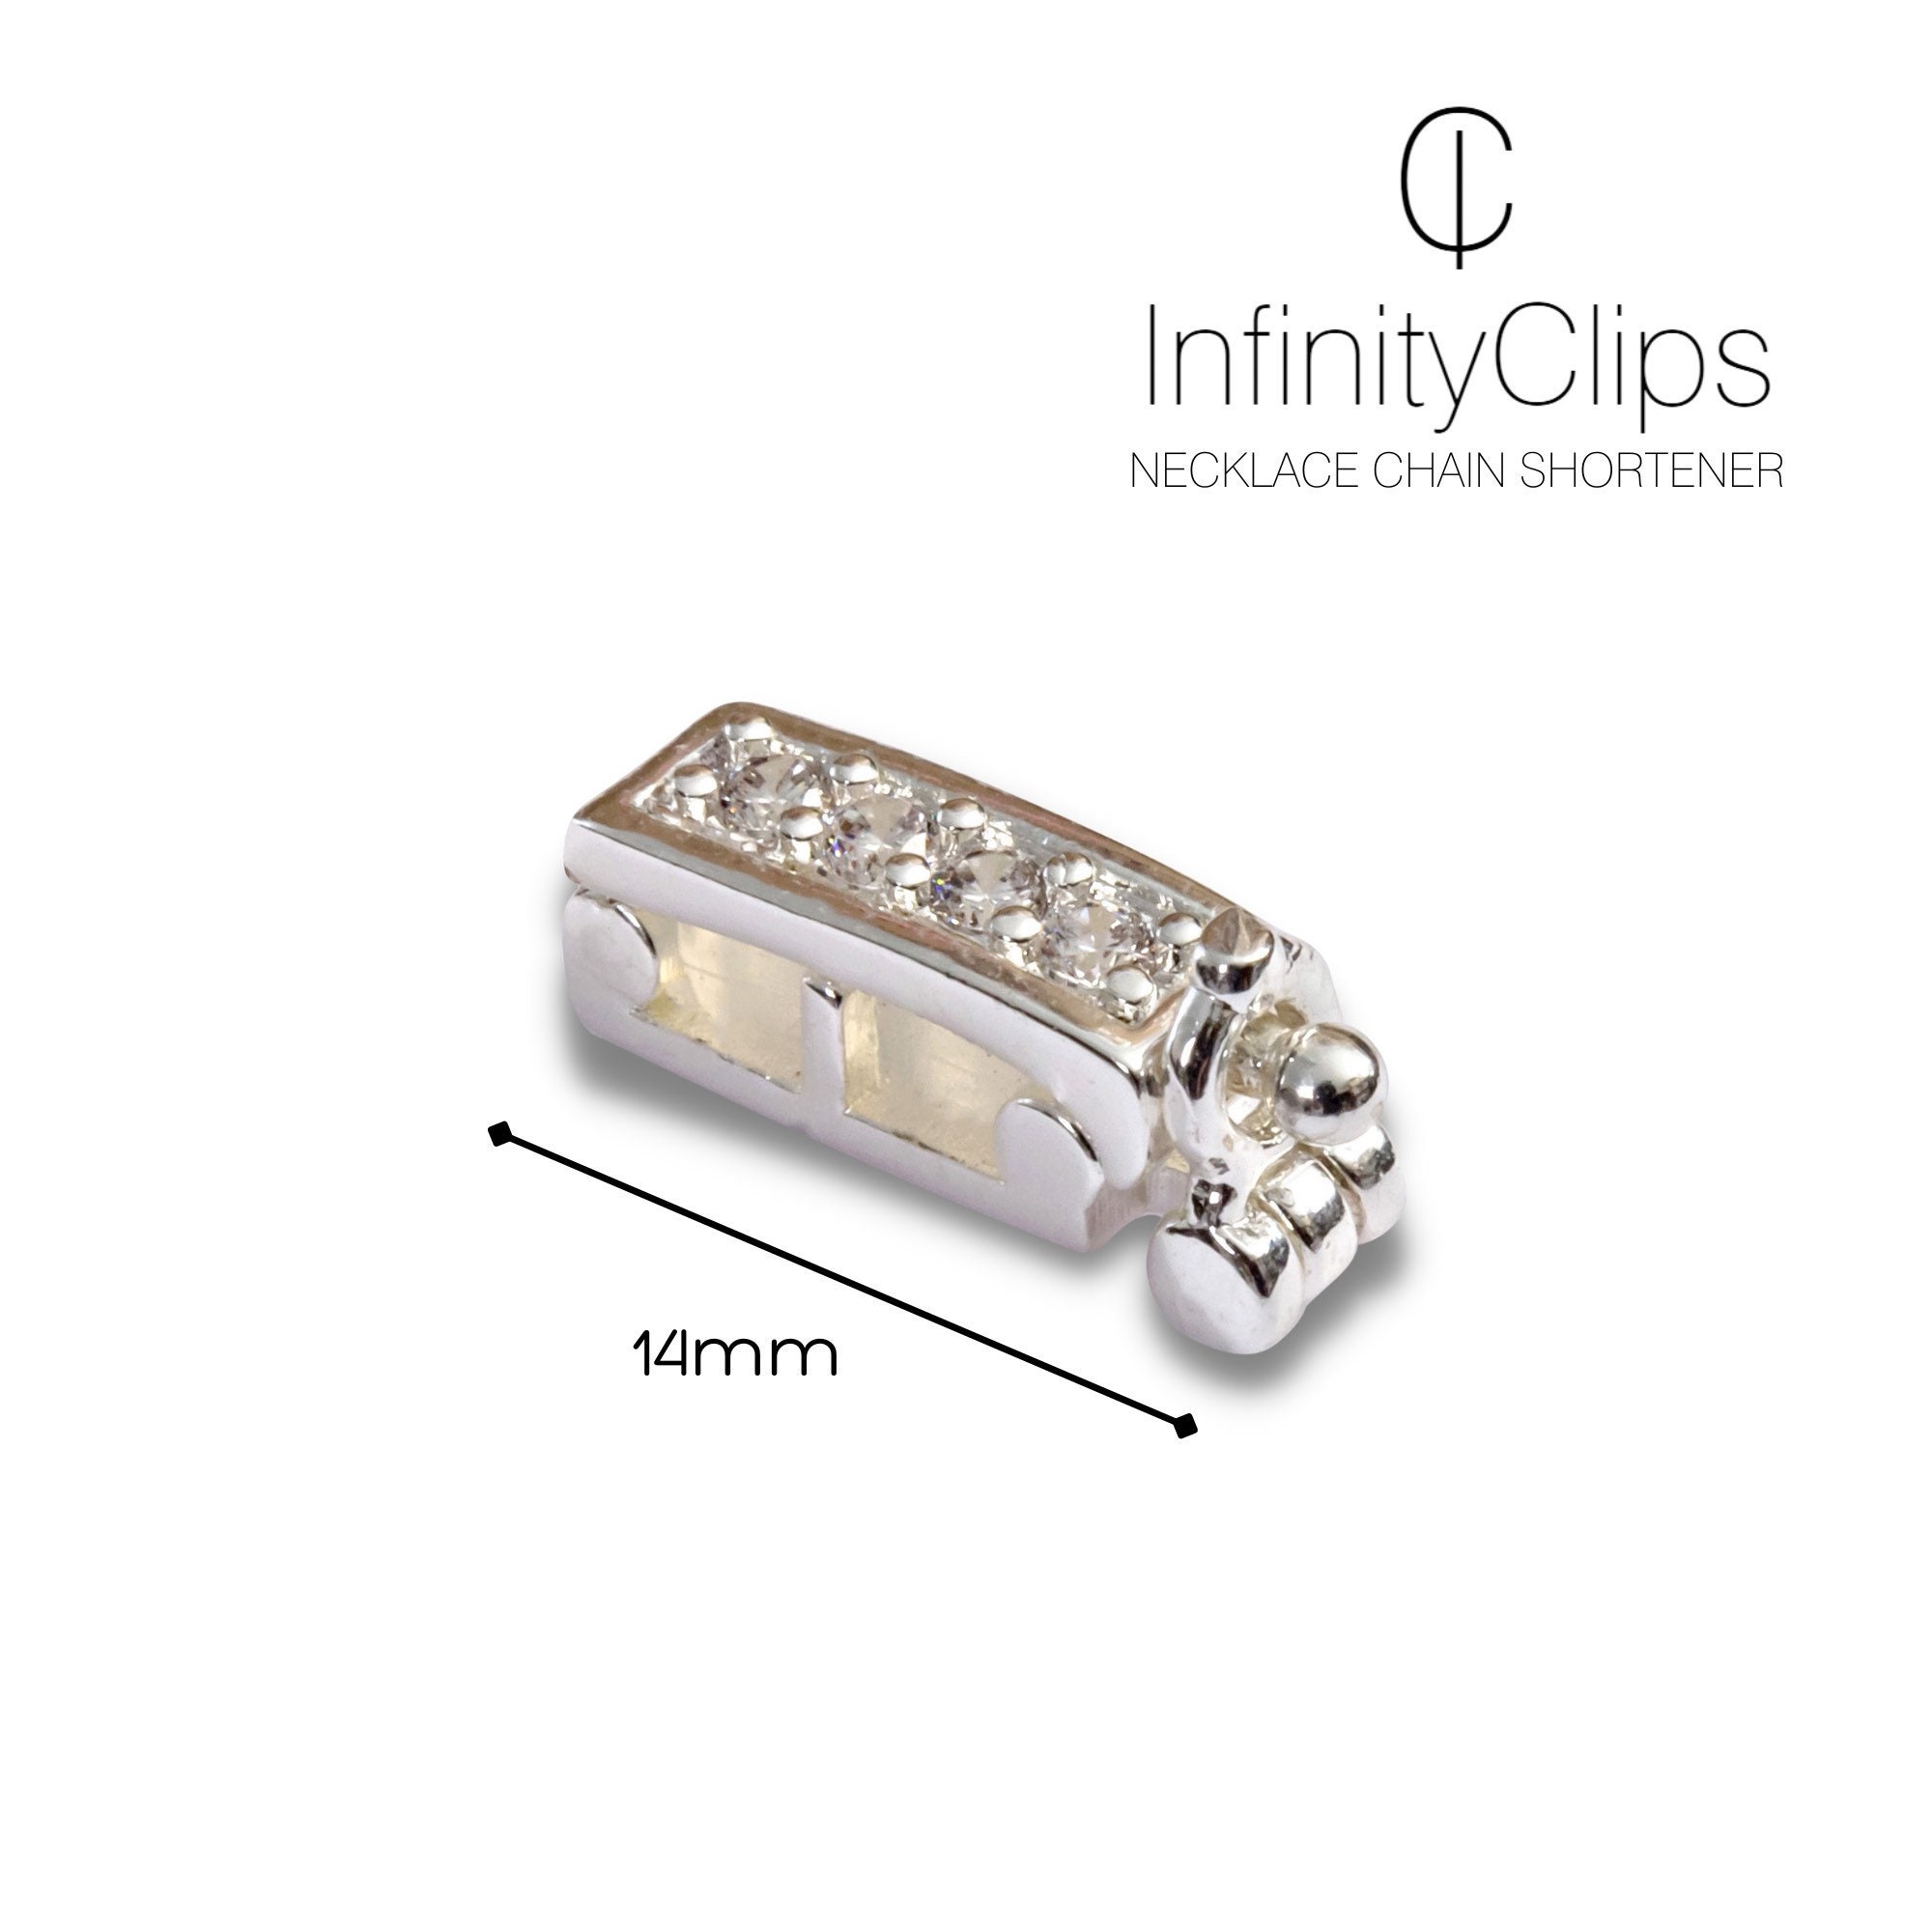 Infinity Clips Small Classic Gold Necklace Shortener With Safety Clasp,  Chain Shortener, Clasp for Necklace 